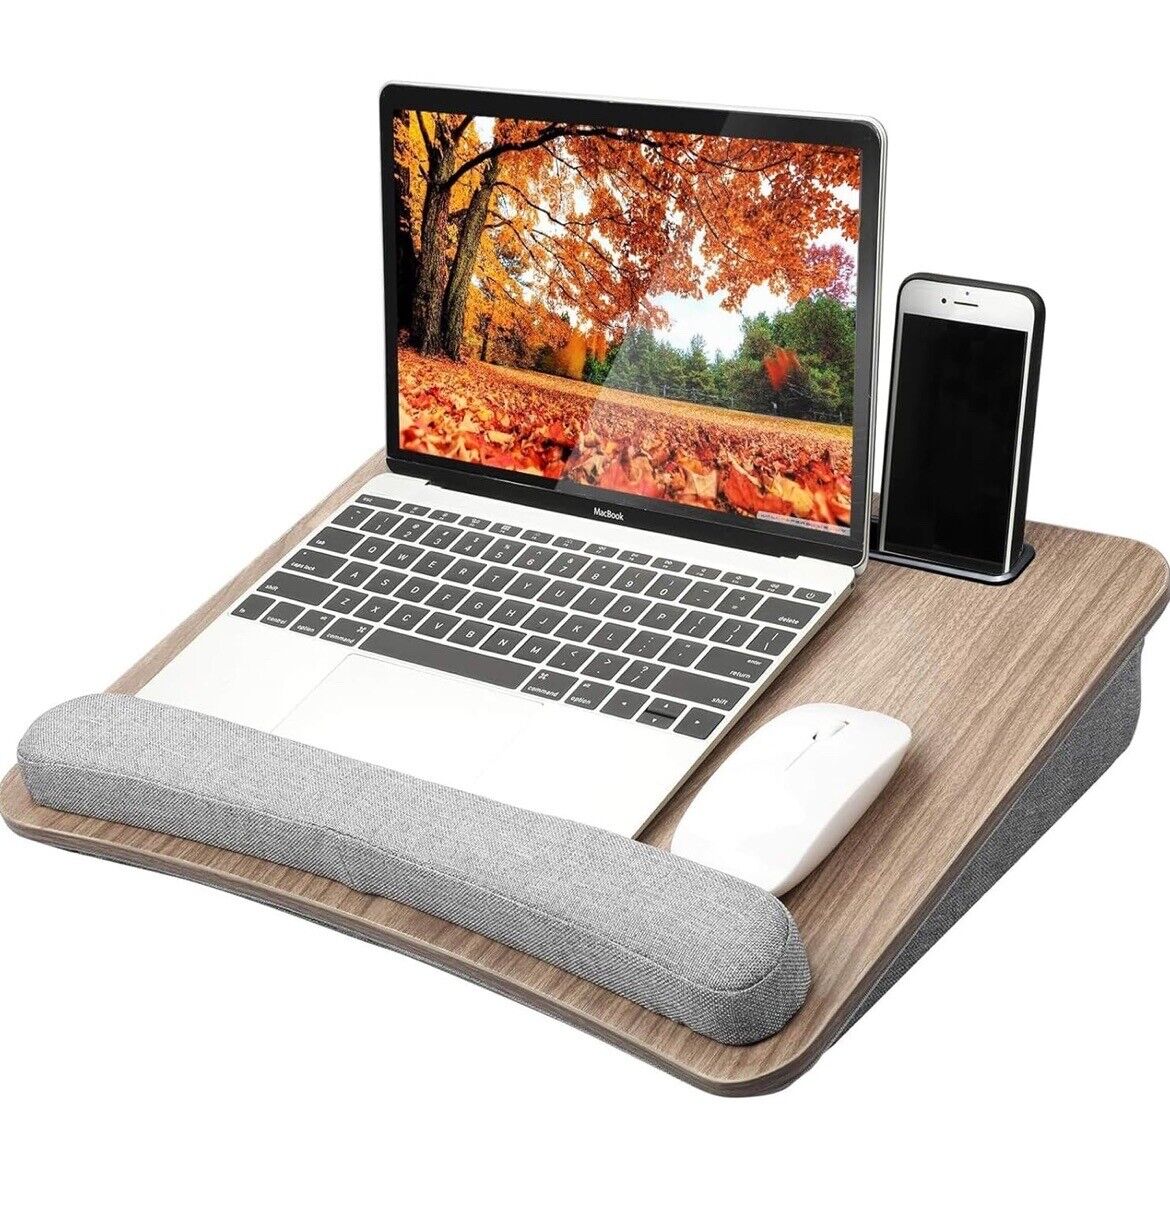 HUANUO Portable Lap Laptop Desk with Pillow Cushion, Fits up to 15.6 inch